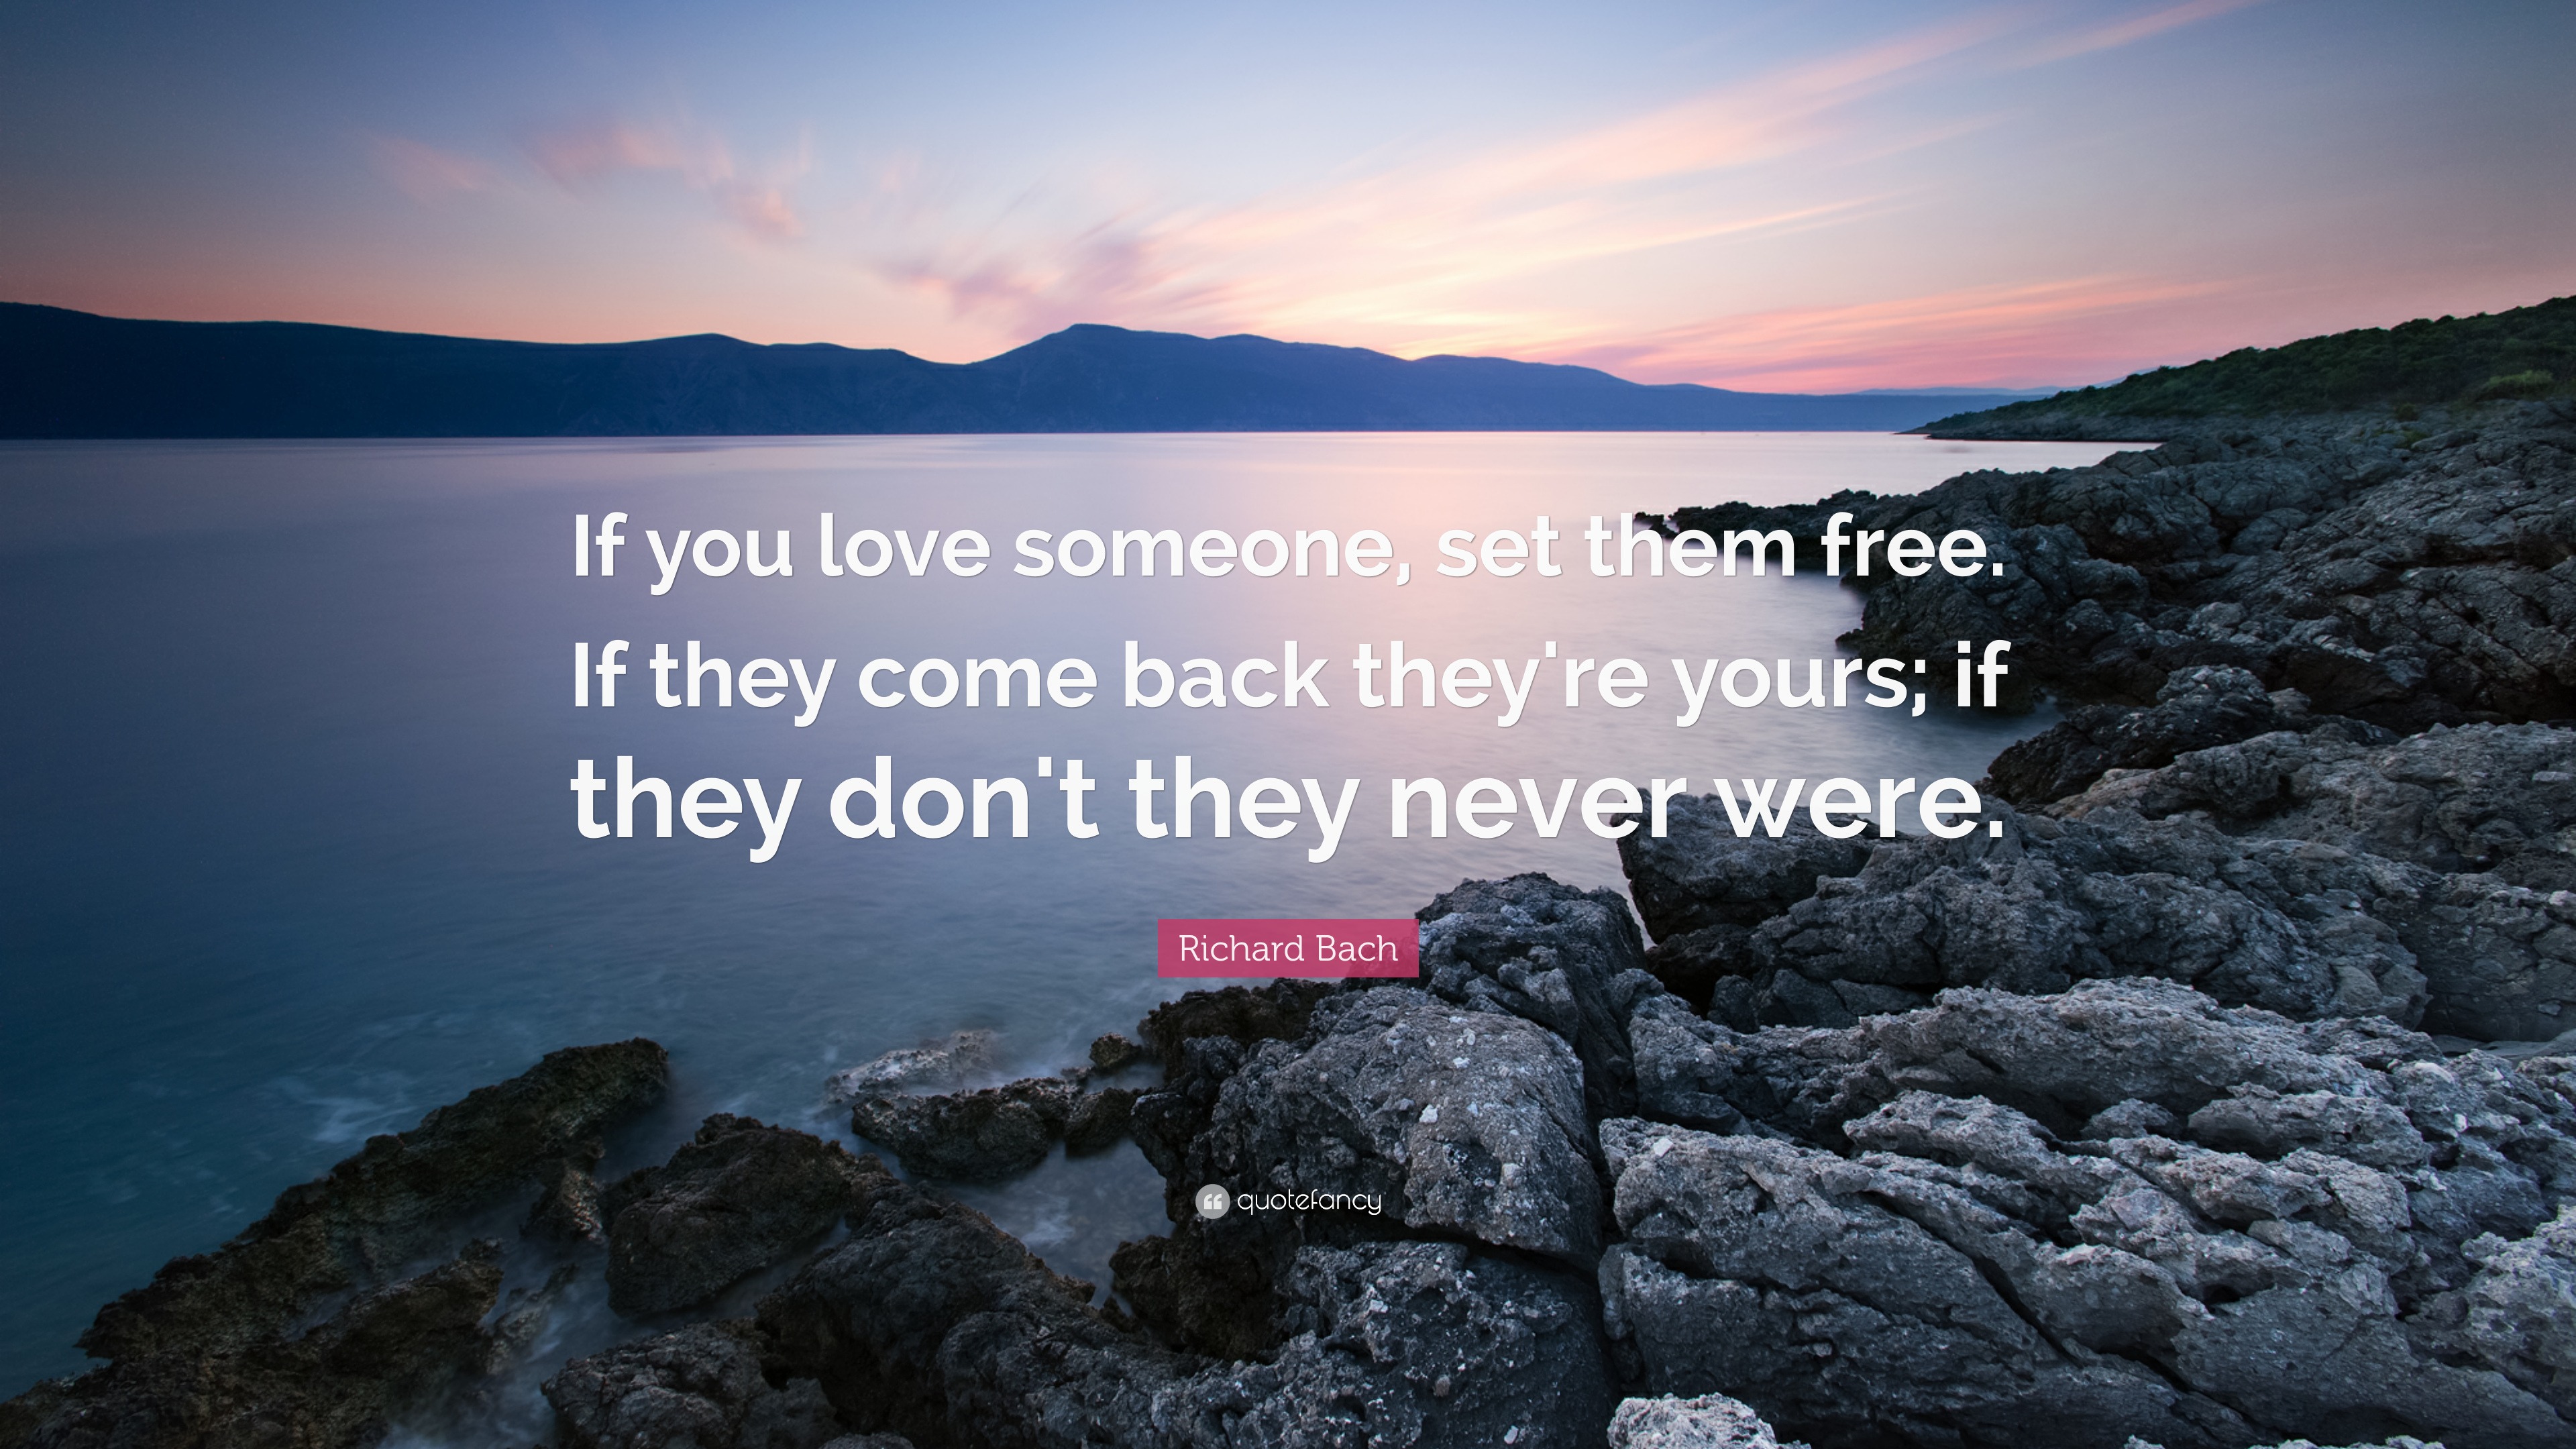 Richard Bach - If you love someone, set them free. If they